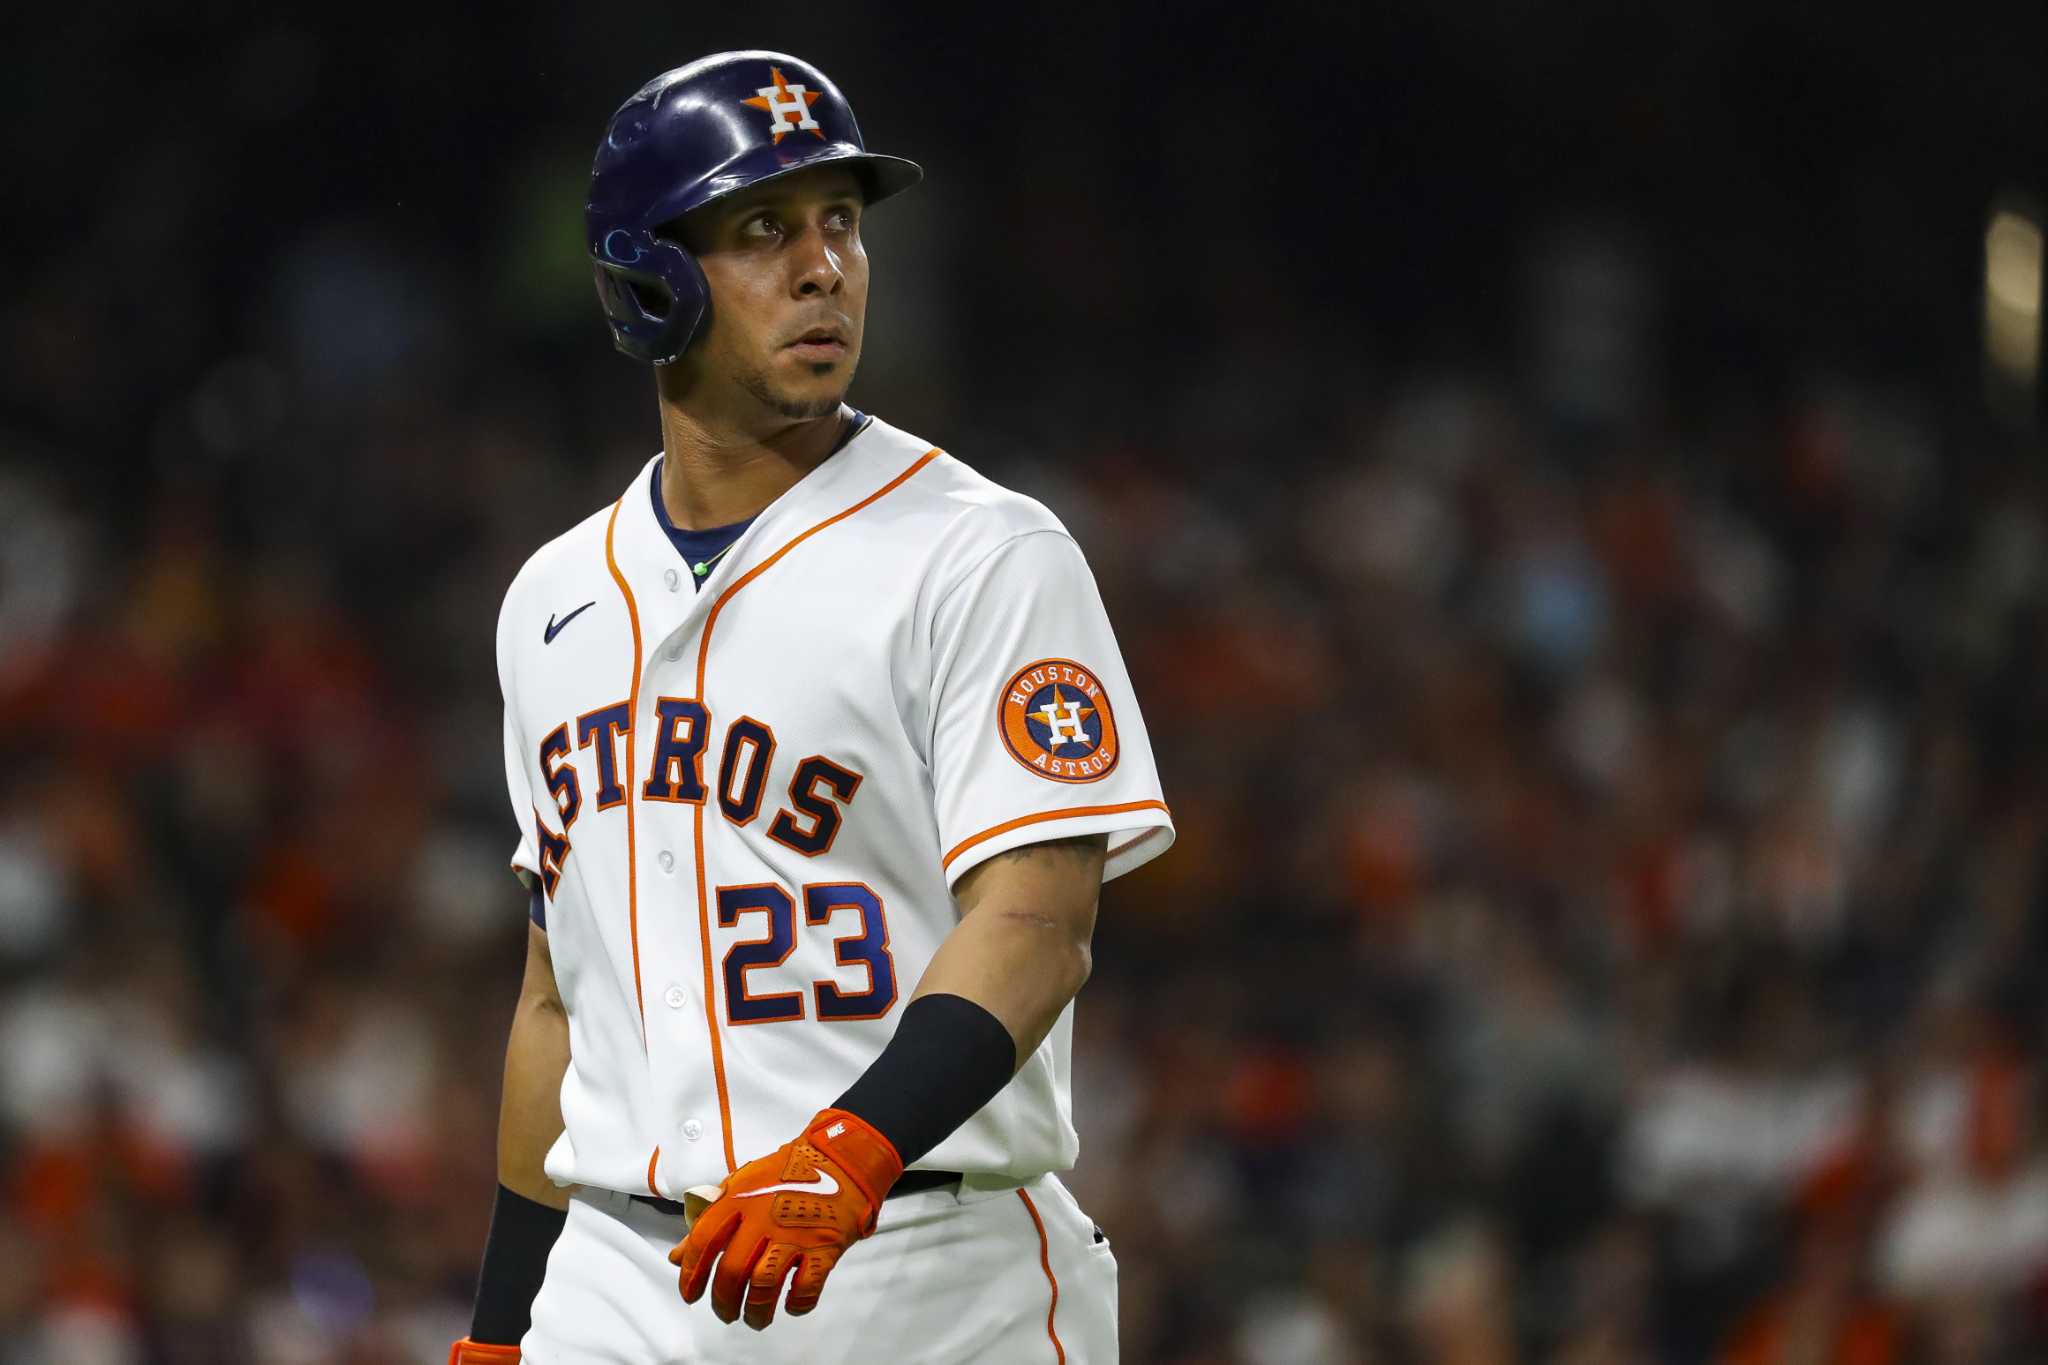 Opinion Here S To Michael Brantley The Astros Player With A Quiet Smile And A Reliable Bat